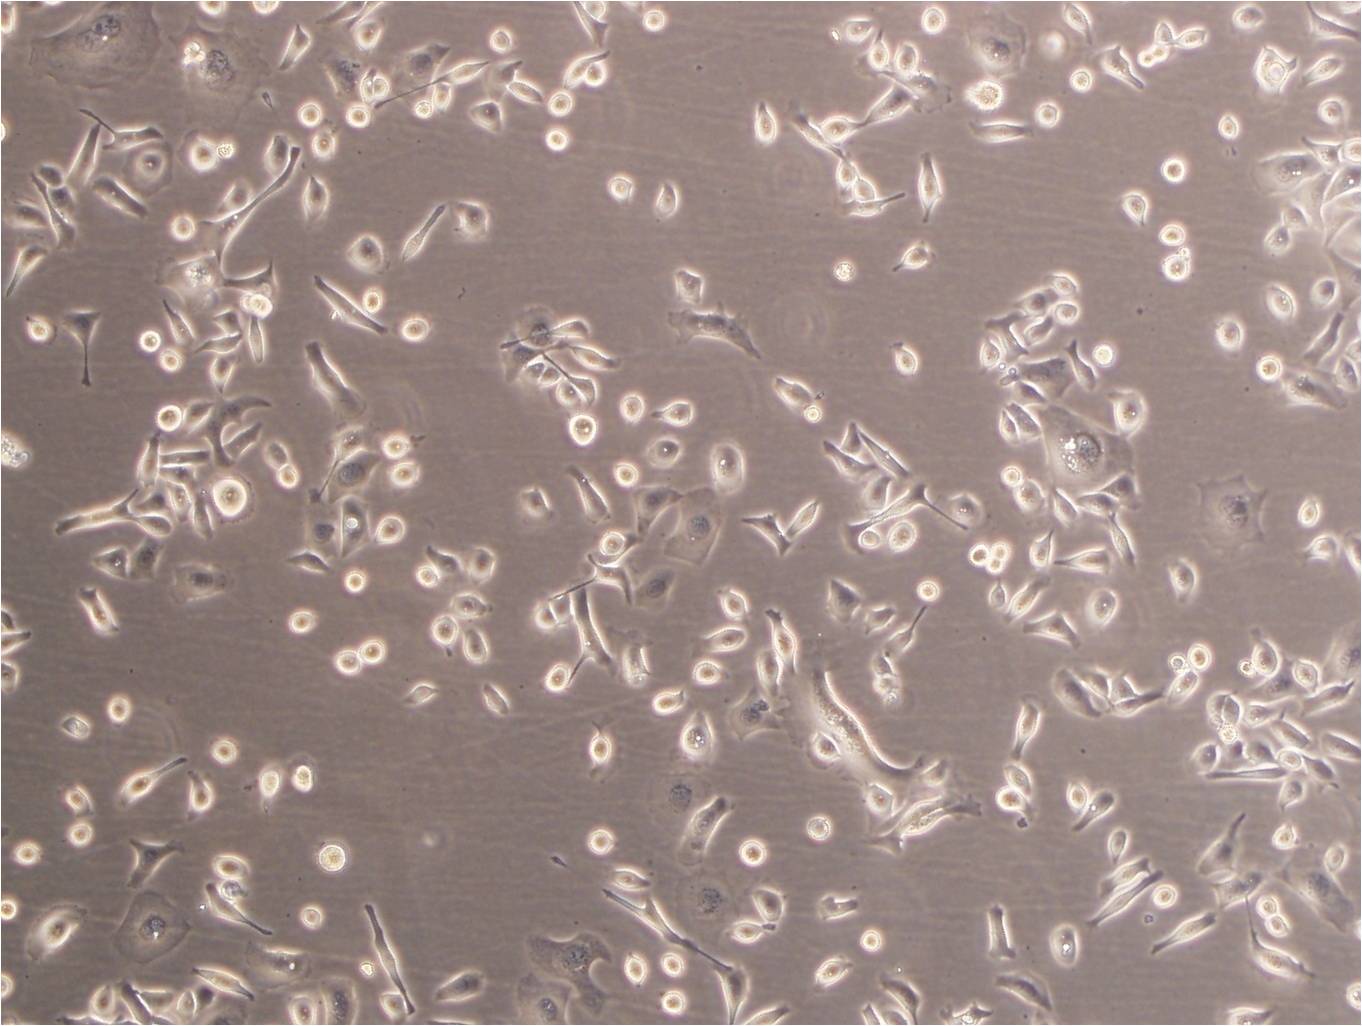 PFSK-1 epithelioid cells人恶性胚瘤细胞系,PFSK-1 epithelioid cells